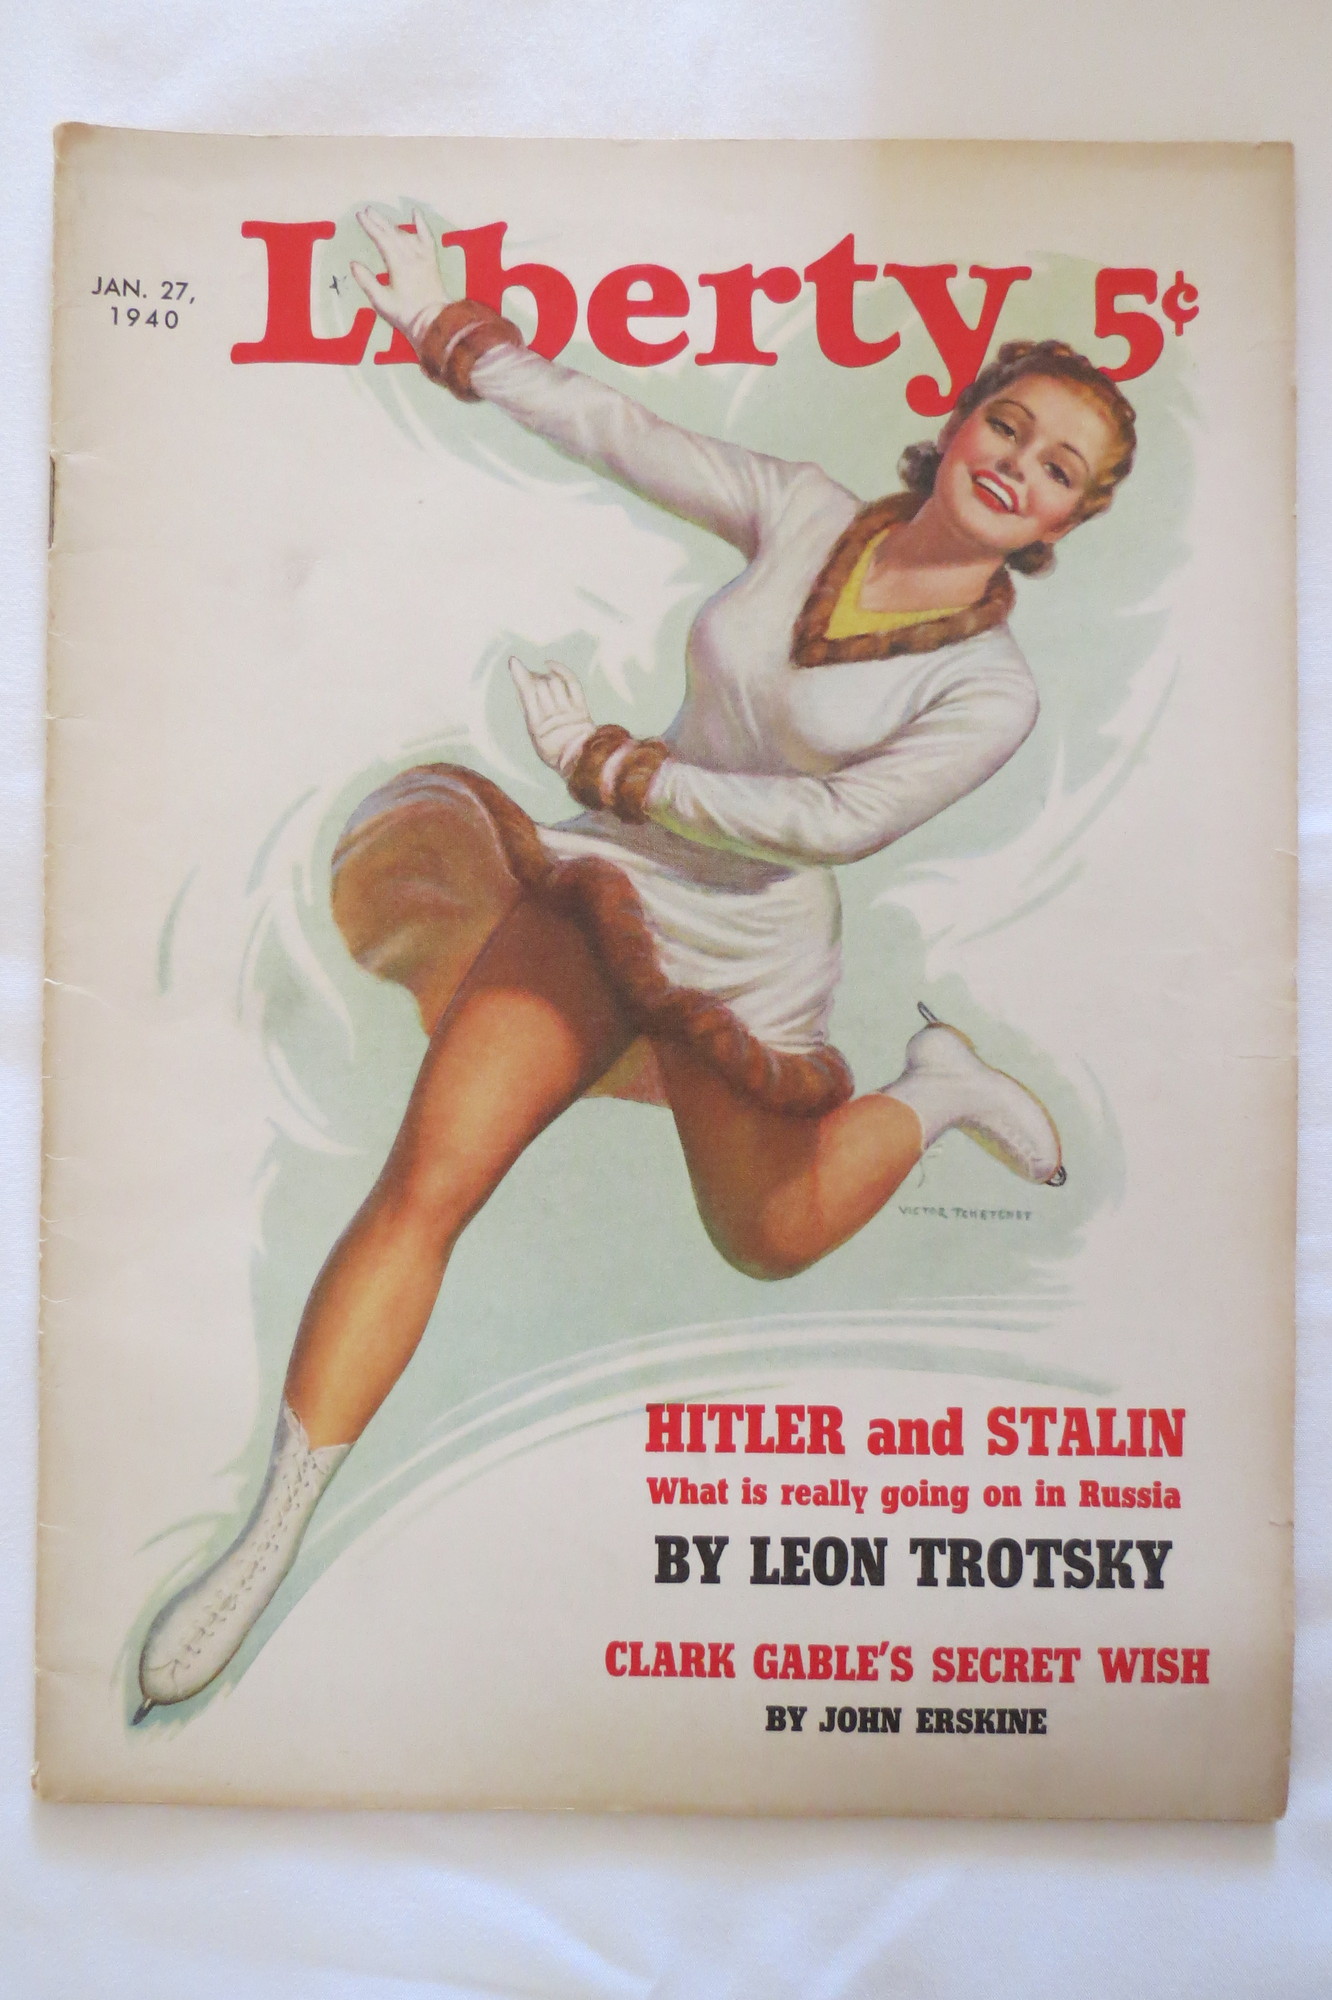 Image for LIBERTY MAGAZINE JANUARY 27, 1940 (ICE SKATER COVER BY VICTOR TCHETCHET; HITLER AND STALIN; CLARK GABLE'S SECRET WISH)